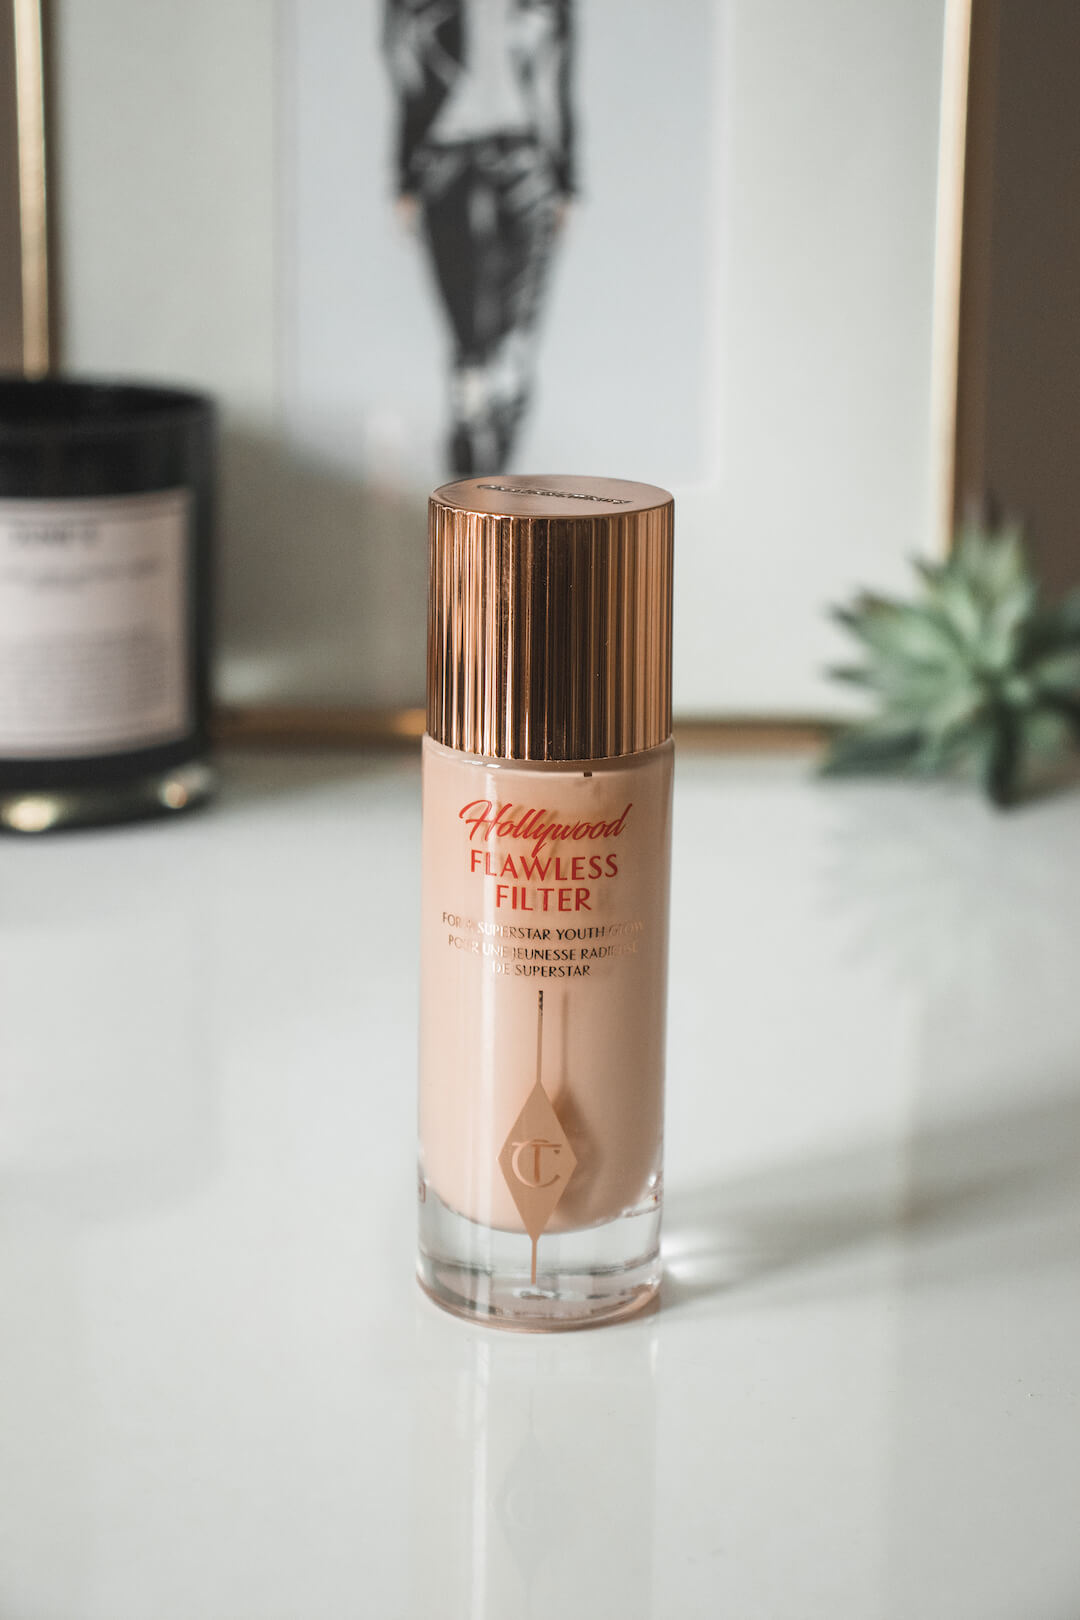 The Charlotte Tilbury Hollywood Flawless Filter Is the Prettiest Highlighter... Ever?